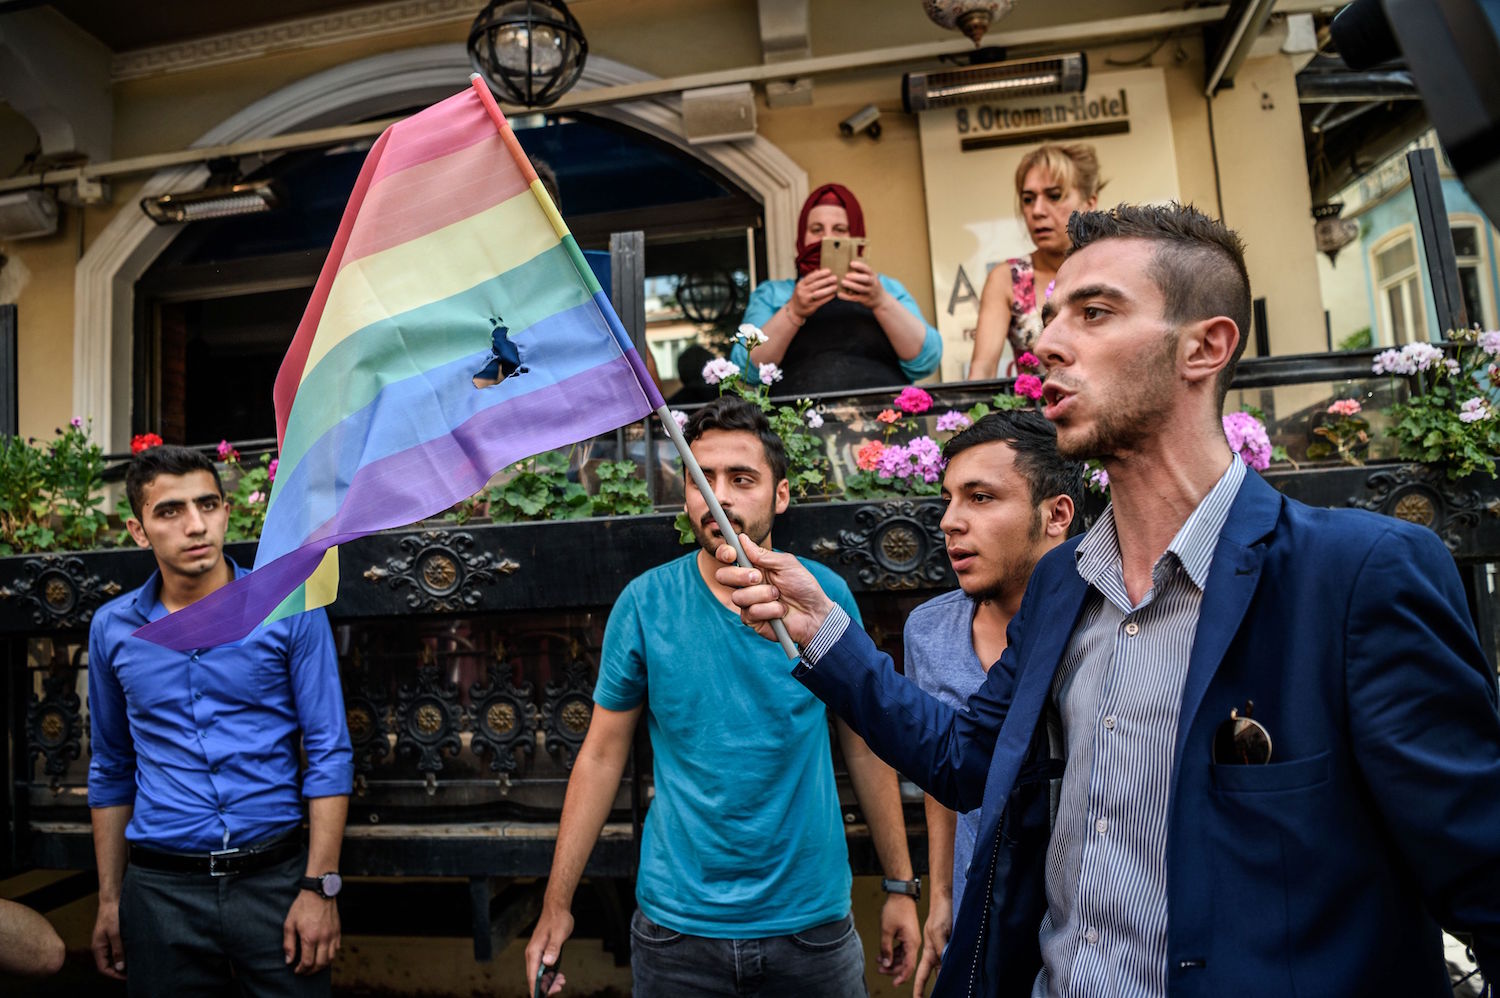 Turkish nationalists burn a rainbow flag during a rally staged by the LGBT community on Istiklal avenue in Istanbul on June 19, 2016. Turkish riot police fired rubber bullets and tear gas to break up a rally staged by the LGBT community in Istanbul on June 19 in defiance of a ban. Several hundred police surrounded the main Taksim Square -- where all demonstrations have been banned since 2013 -- to prevent the "Trans Pride" event taking place during Ramadan.  / AFP / OZAN KOSE        (Photo credit should read OZAN KOSE/AFP/Getty Images)